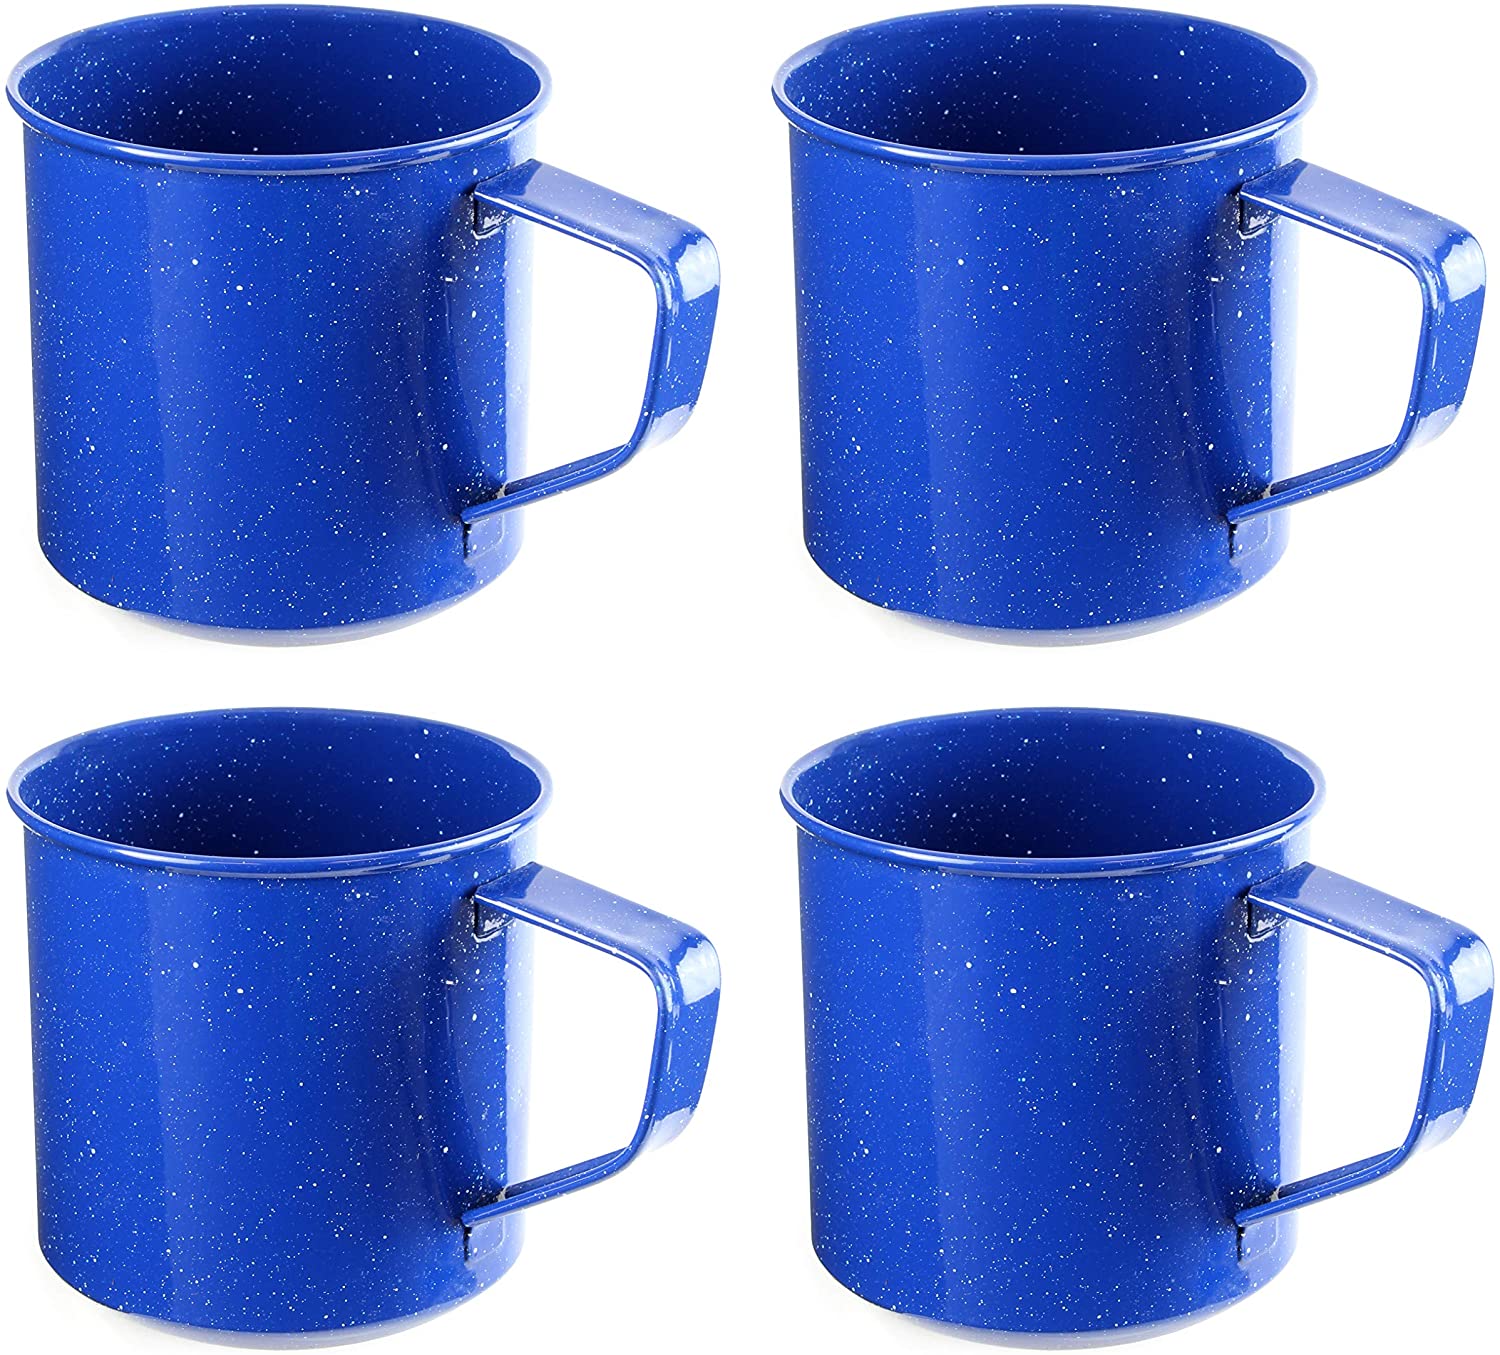 Enamel Drinking Mugs Cups for Home Use/Office/Party or Camping Bright Colors and Classic Look TeamFar Tea Coffee Mug Set of 4 12 ounce 